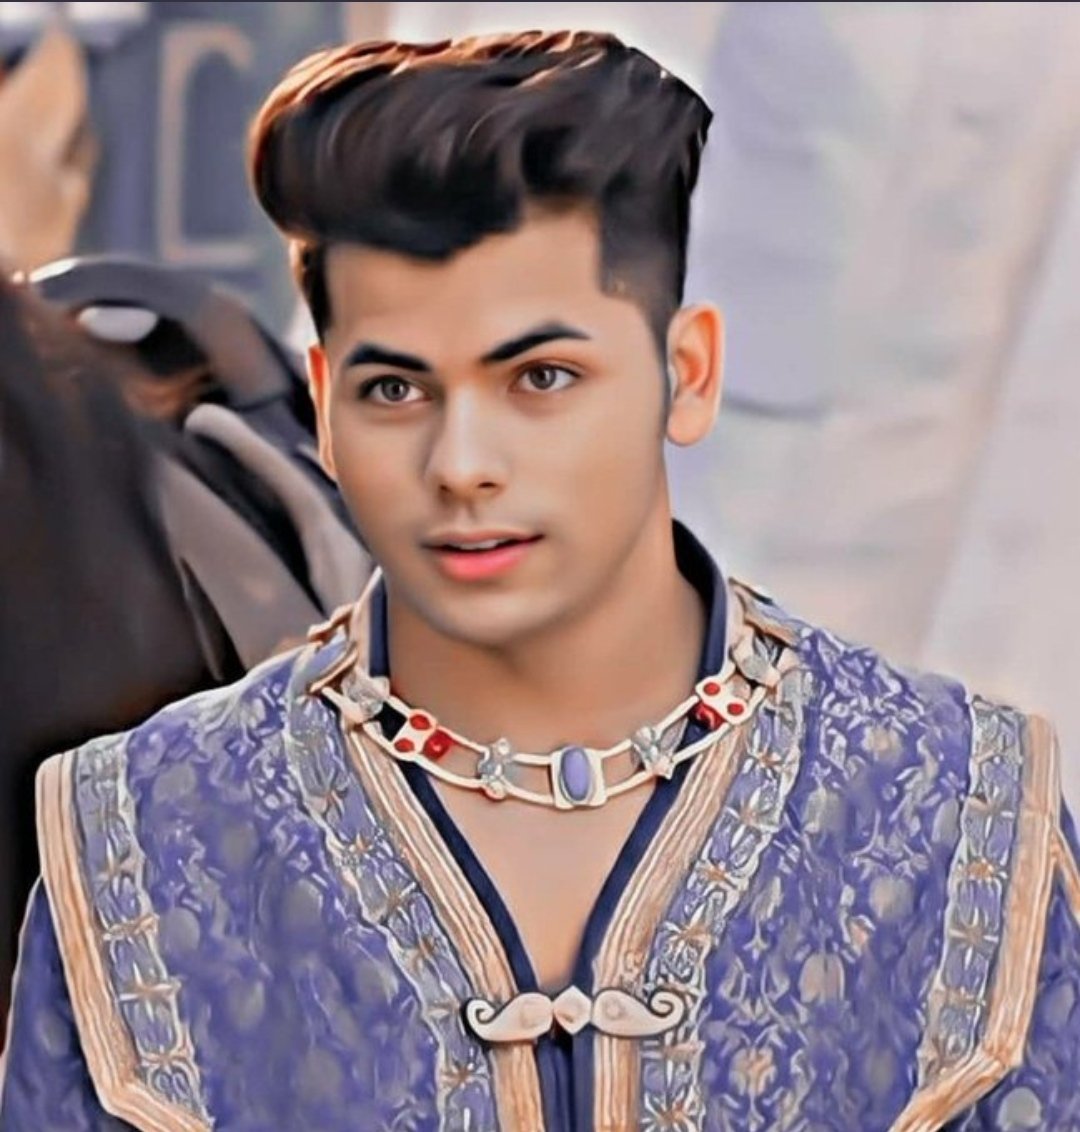 Exclusive - Aladdin's Siddharth Nigam on his bond with Avneet Kaur: She is  one of my closest friends - Times of India